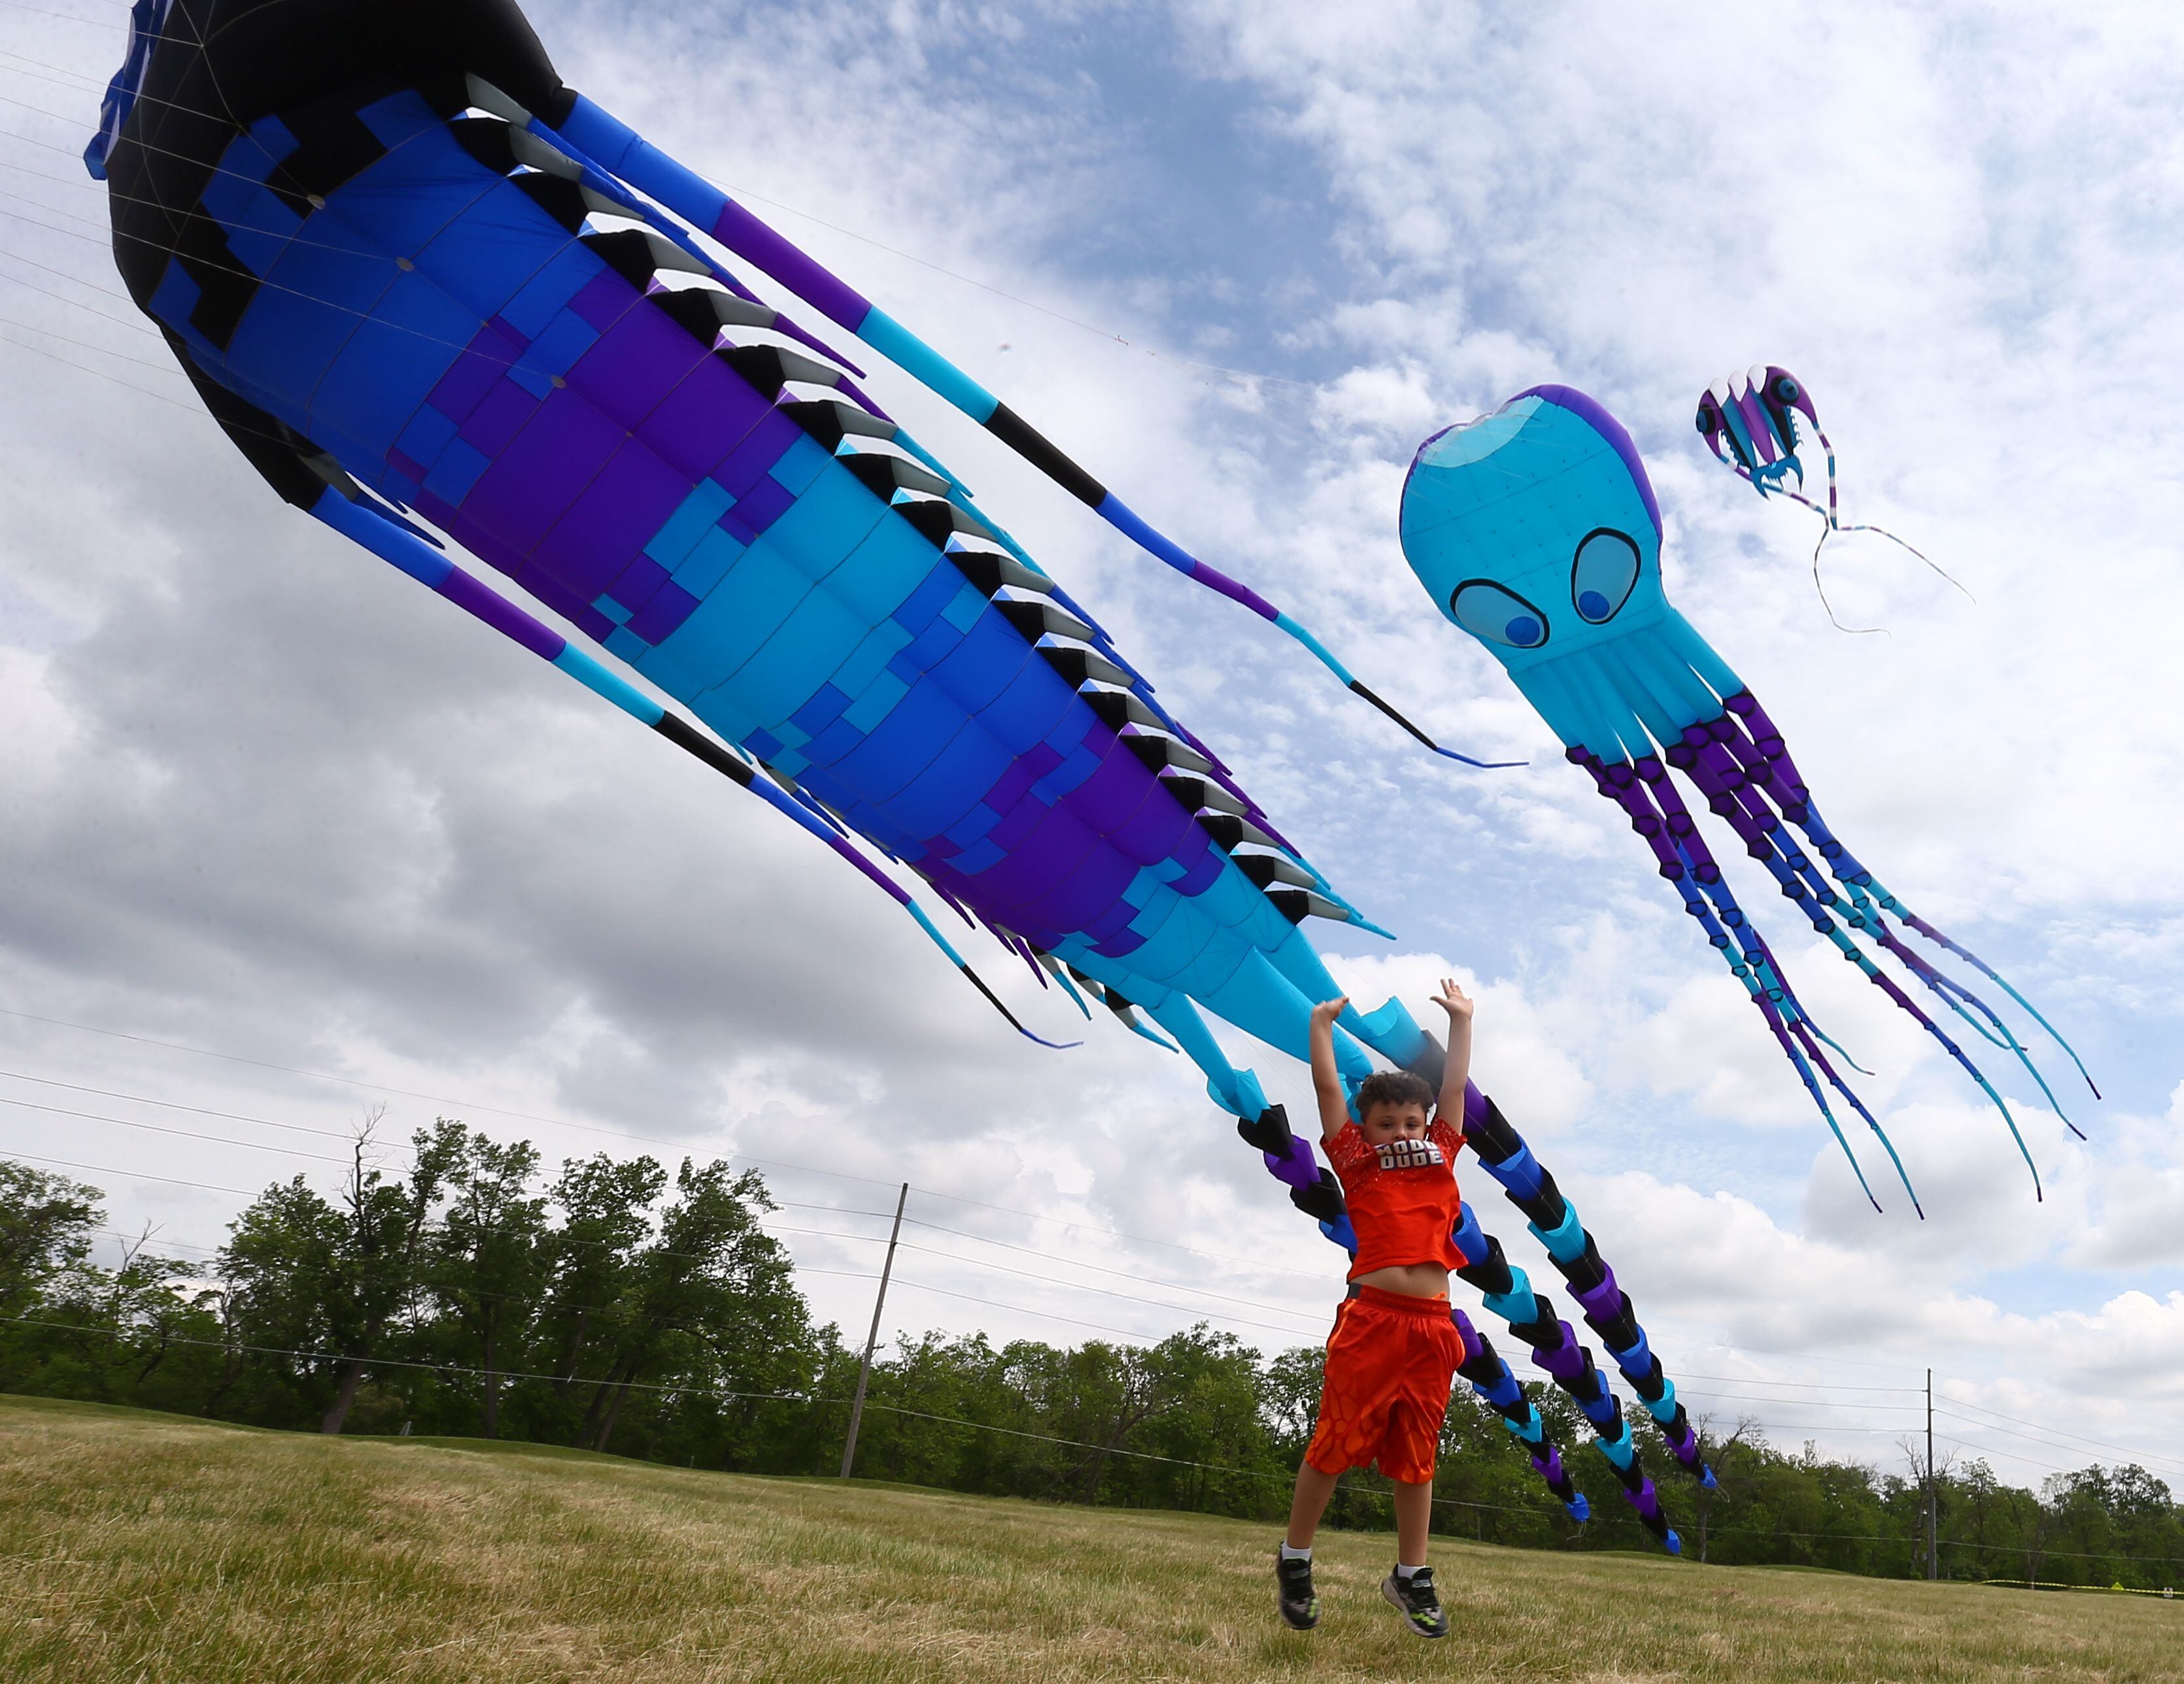 Dominick Anderson, jumps in the air to try to reach the giant kites flying in the air at the "Kites in Flight" event at Heritage Harbor in Ottawa, on Sunday May 23, 2021.